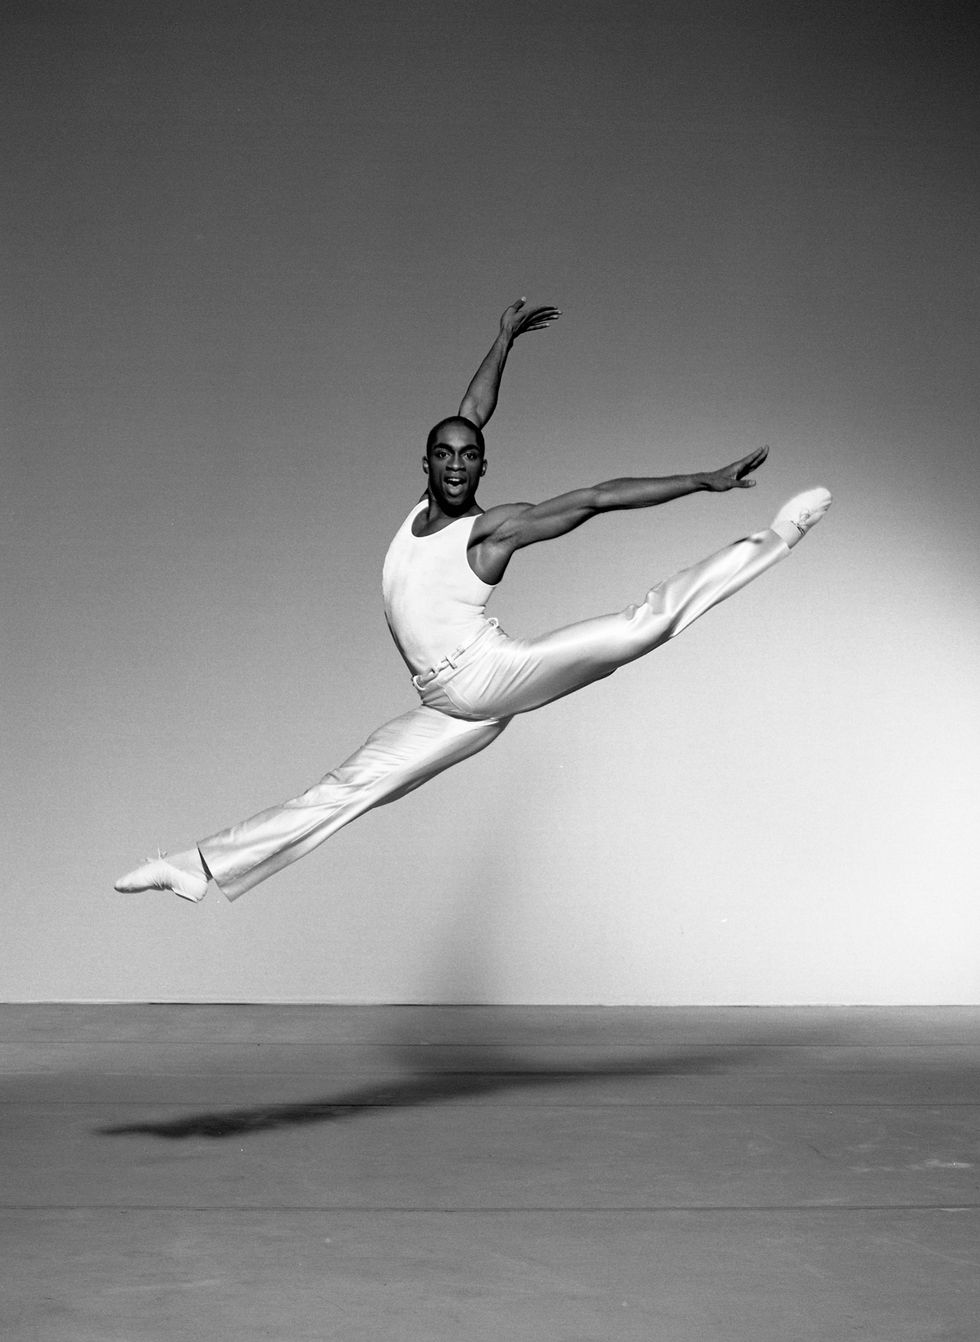 A black-and-white image of a tall, black man doing a split leap